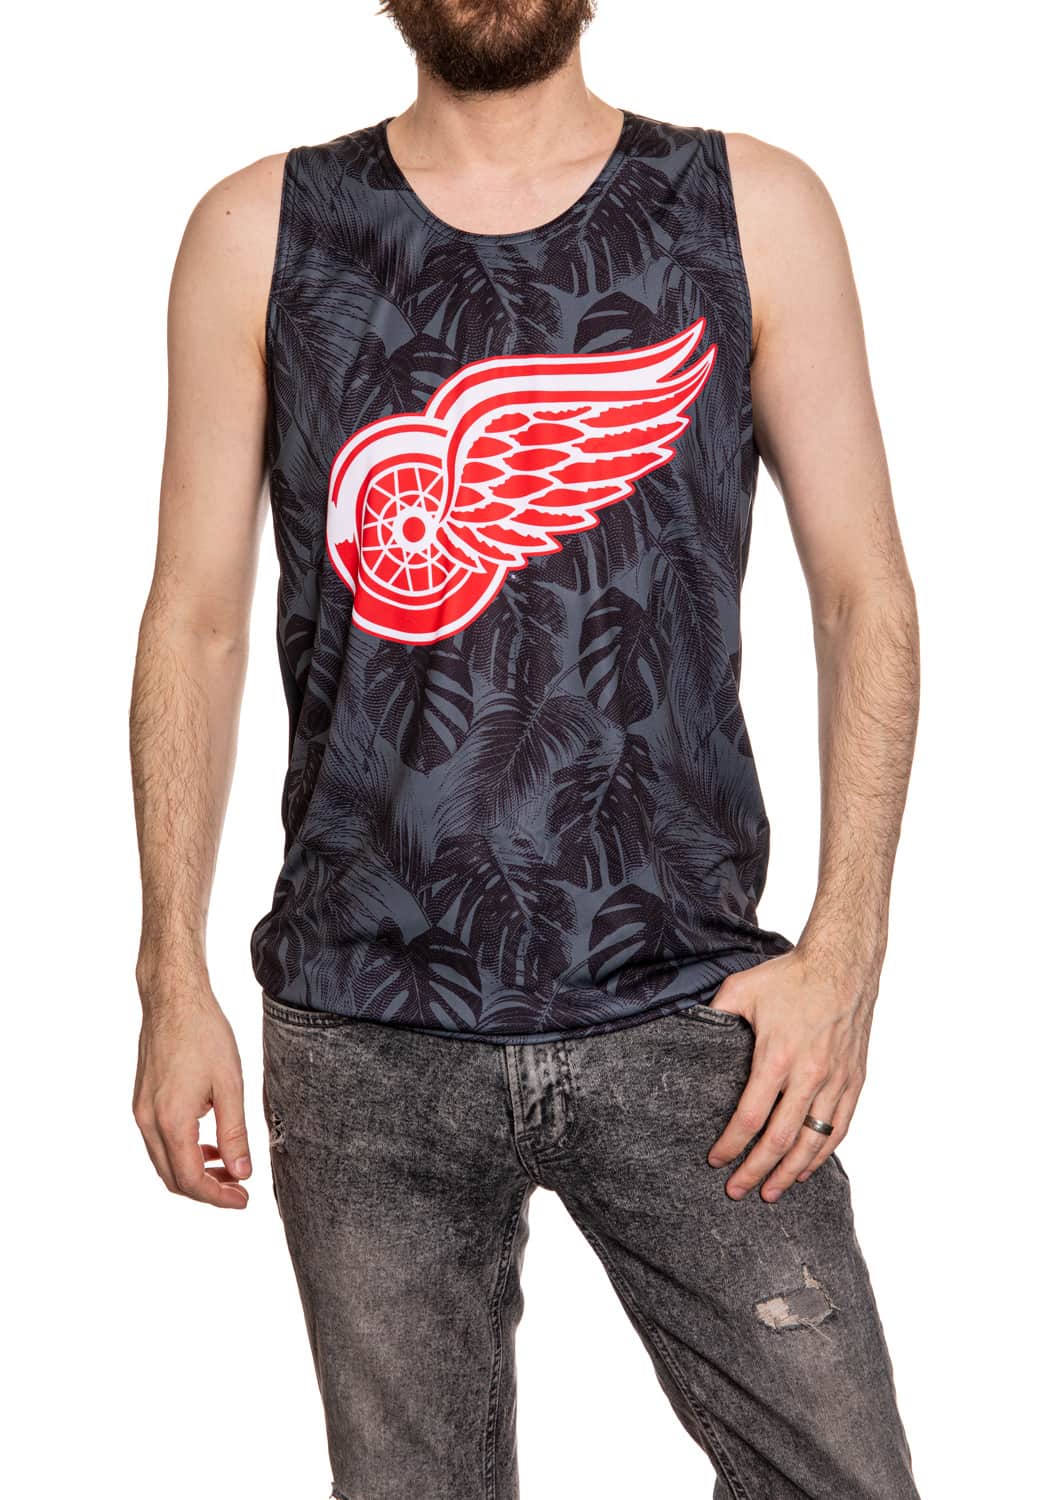 Detroit Red Wings "Palm" Tank Top